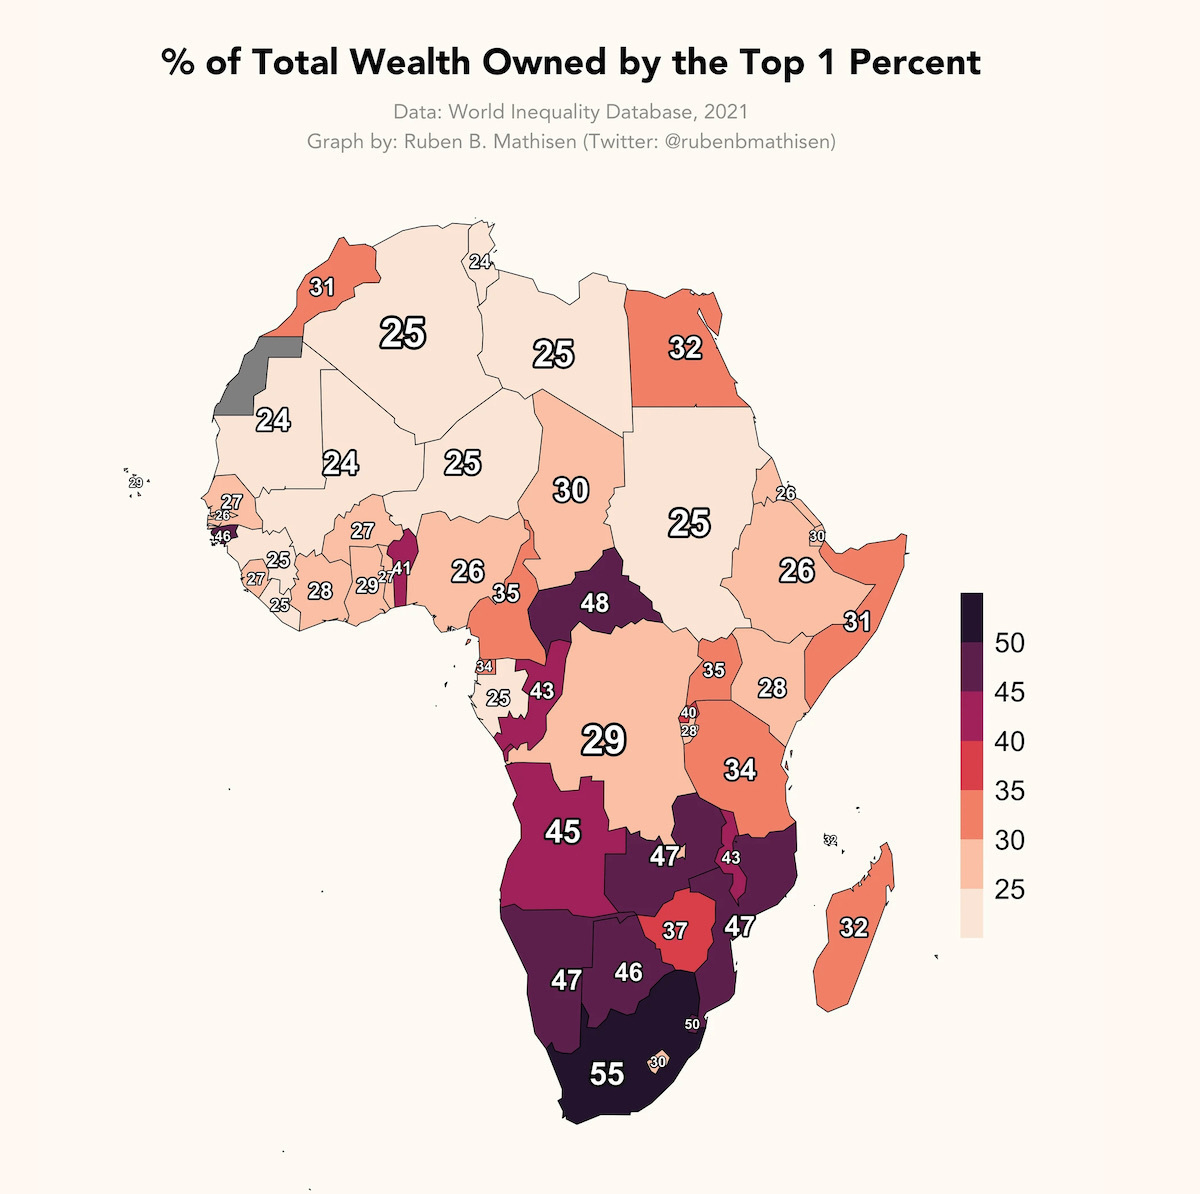 Map of Africashowing the % of Total Wealth Owned by the Top 1 Percent for each country. Some highlights include: South Africa at the highest of 55%, Namibia, Mozambique, Zambia = 47%, Nigeria = 26%, Egypt =32%, Tunisia and Mali at the lowest = 24%